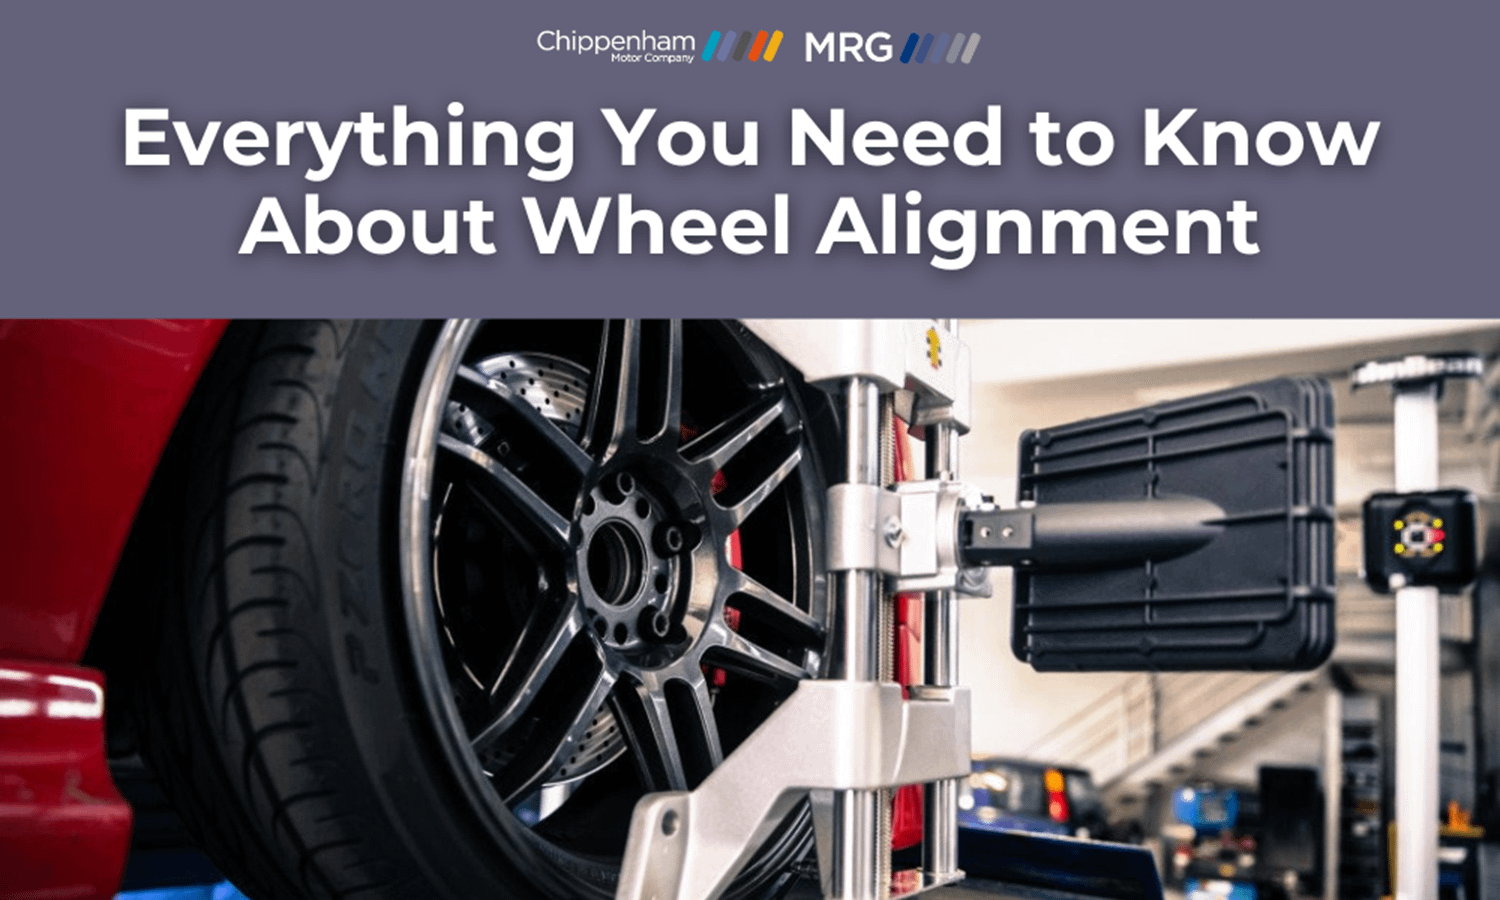 Everything you need to know about wheel alignment